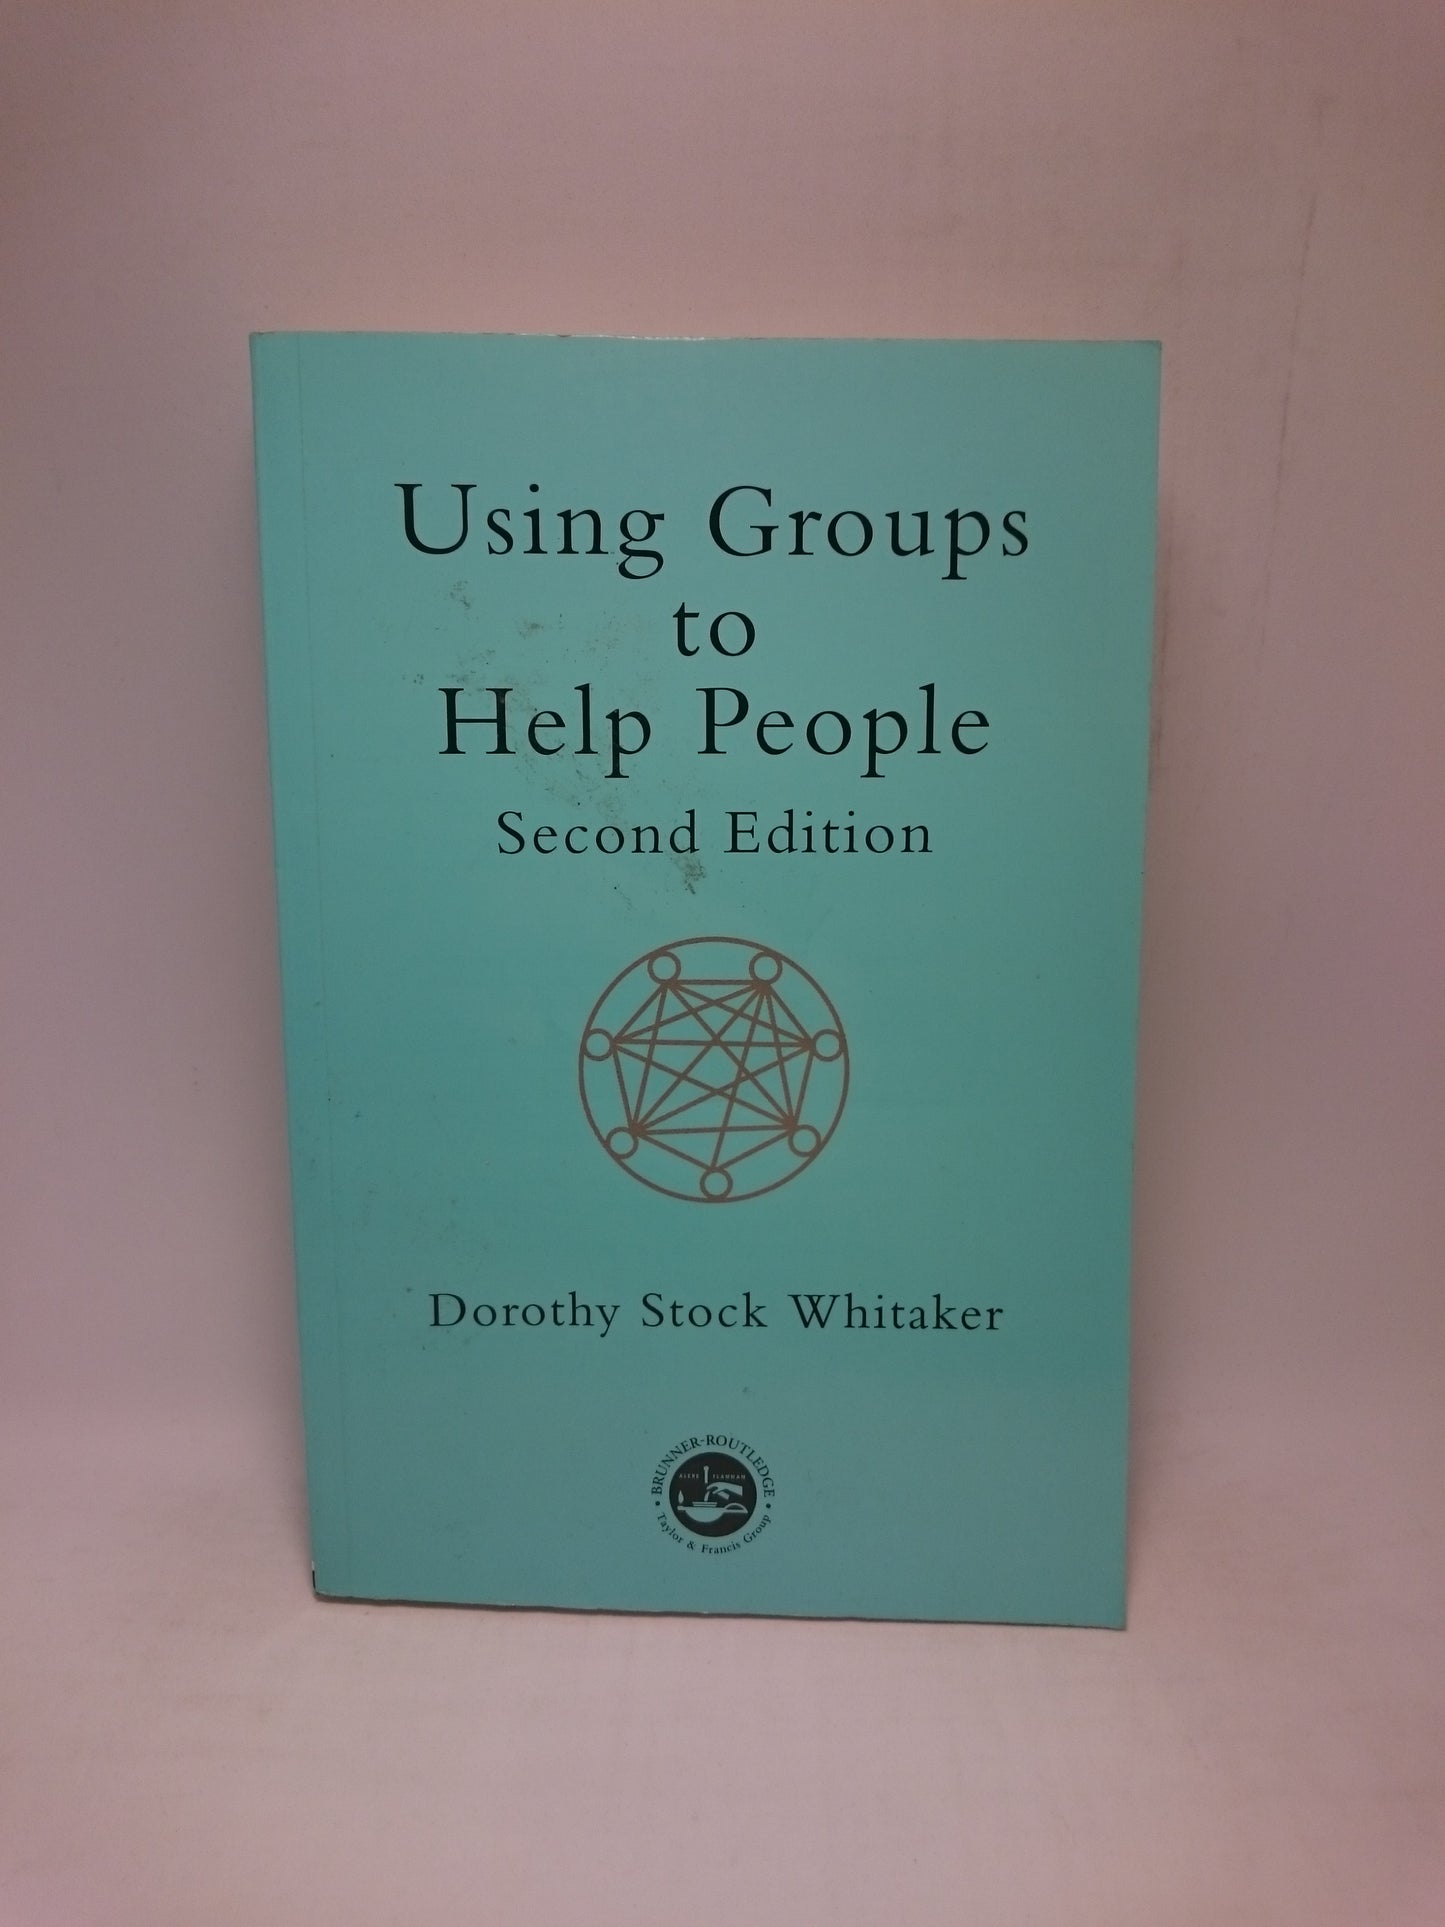 Using Groups to Help People (International Library of Group Psychotherapy and Group Proce)